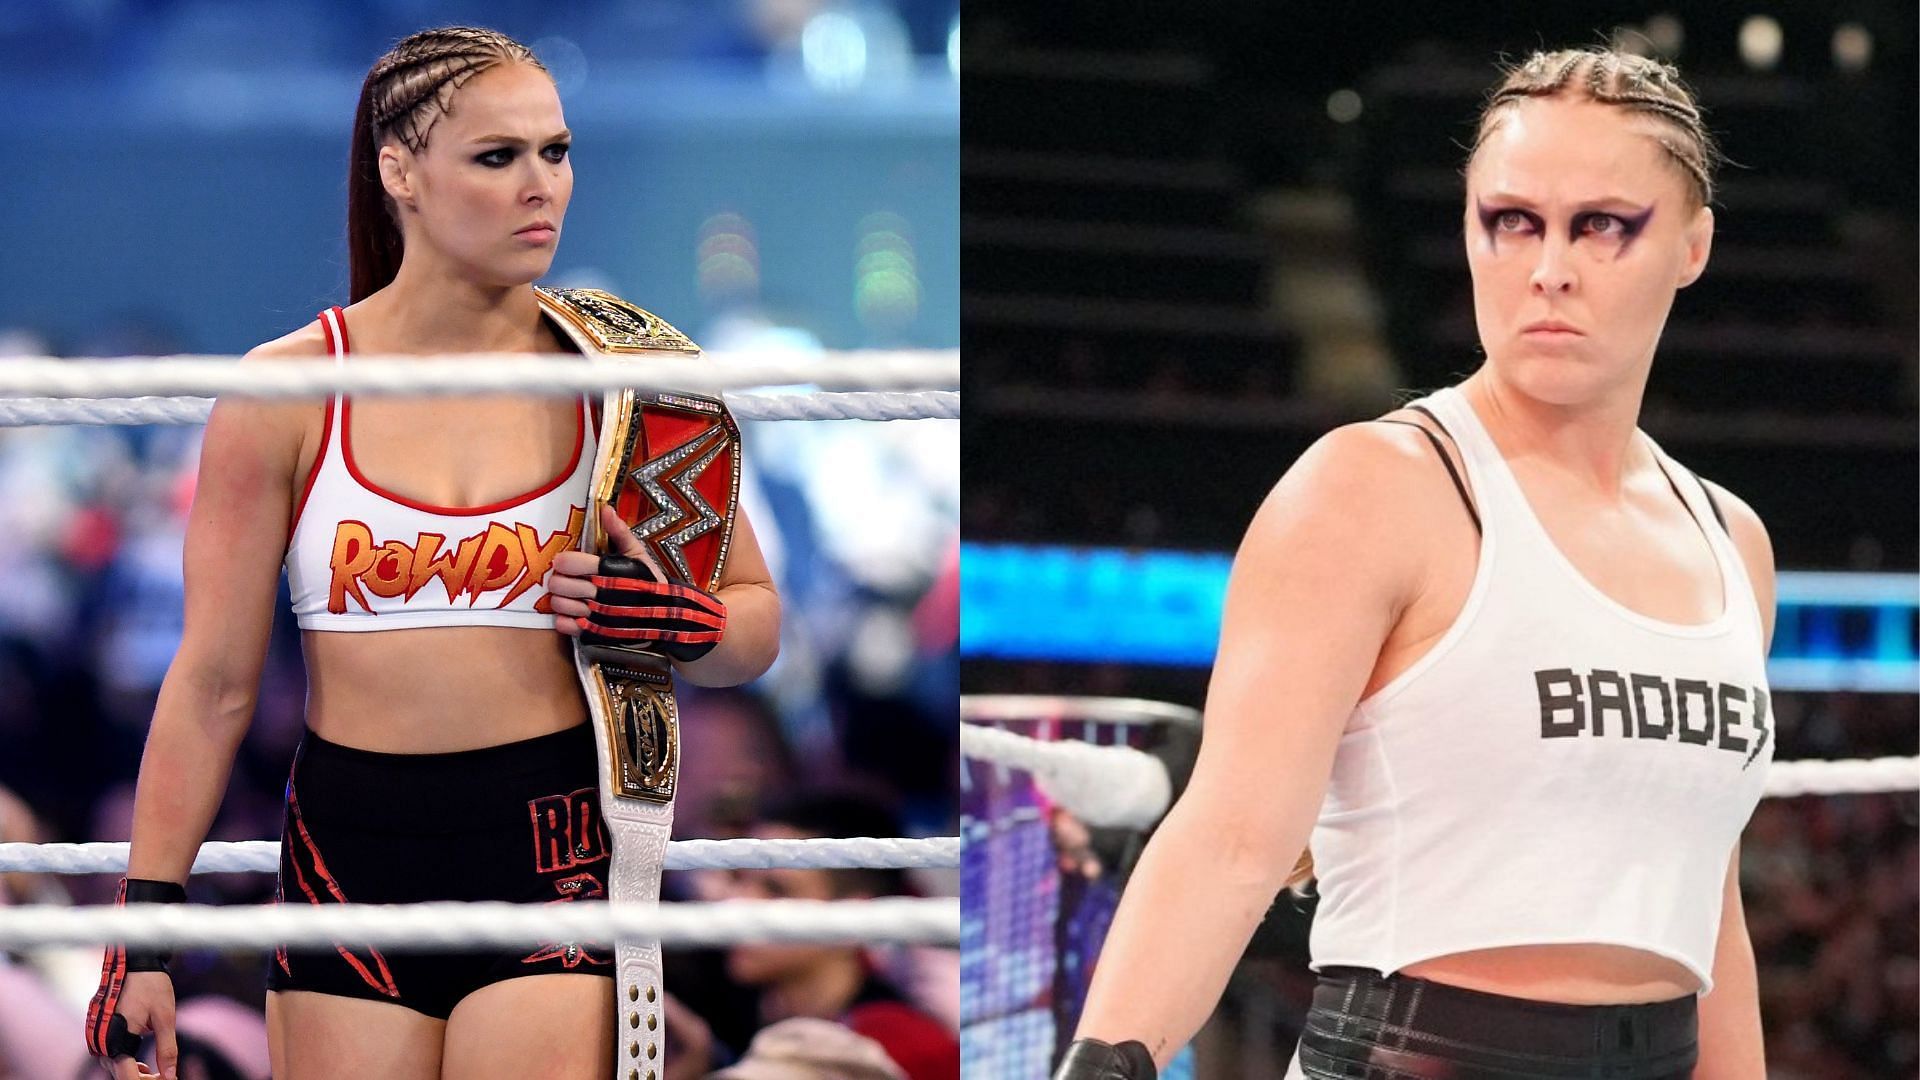 Ronda Rousey recently competed at the Wrestling Revolver Unreal show